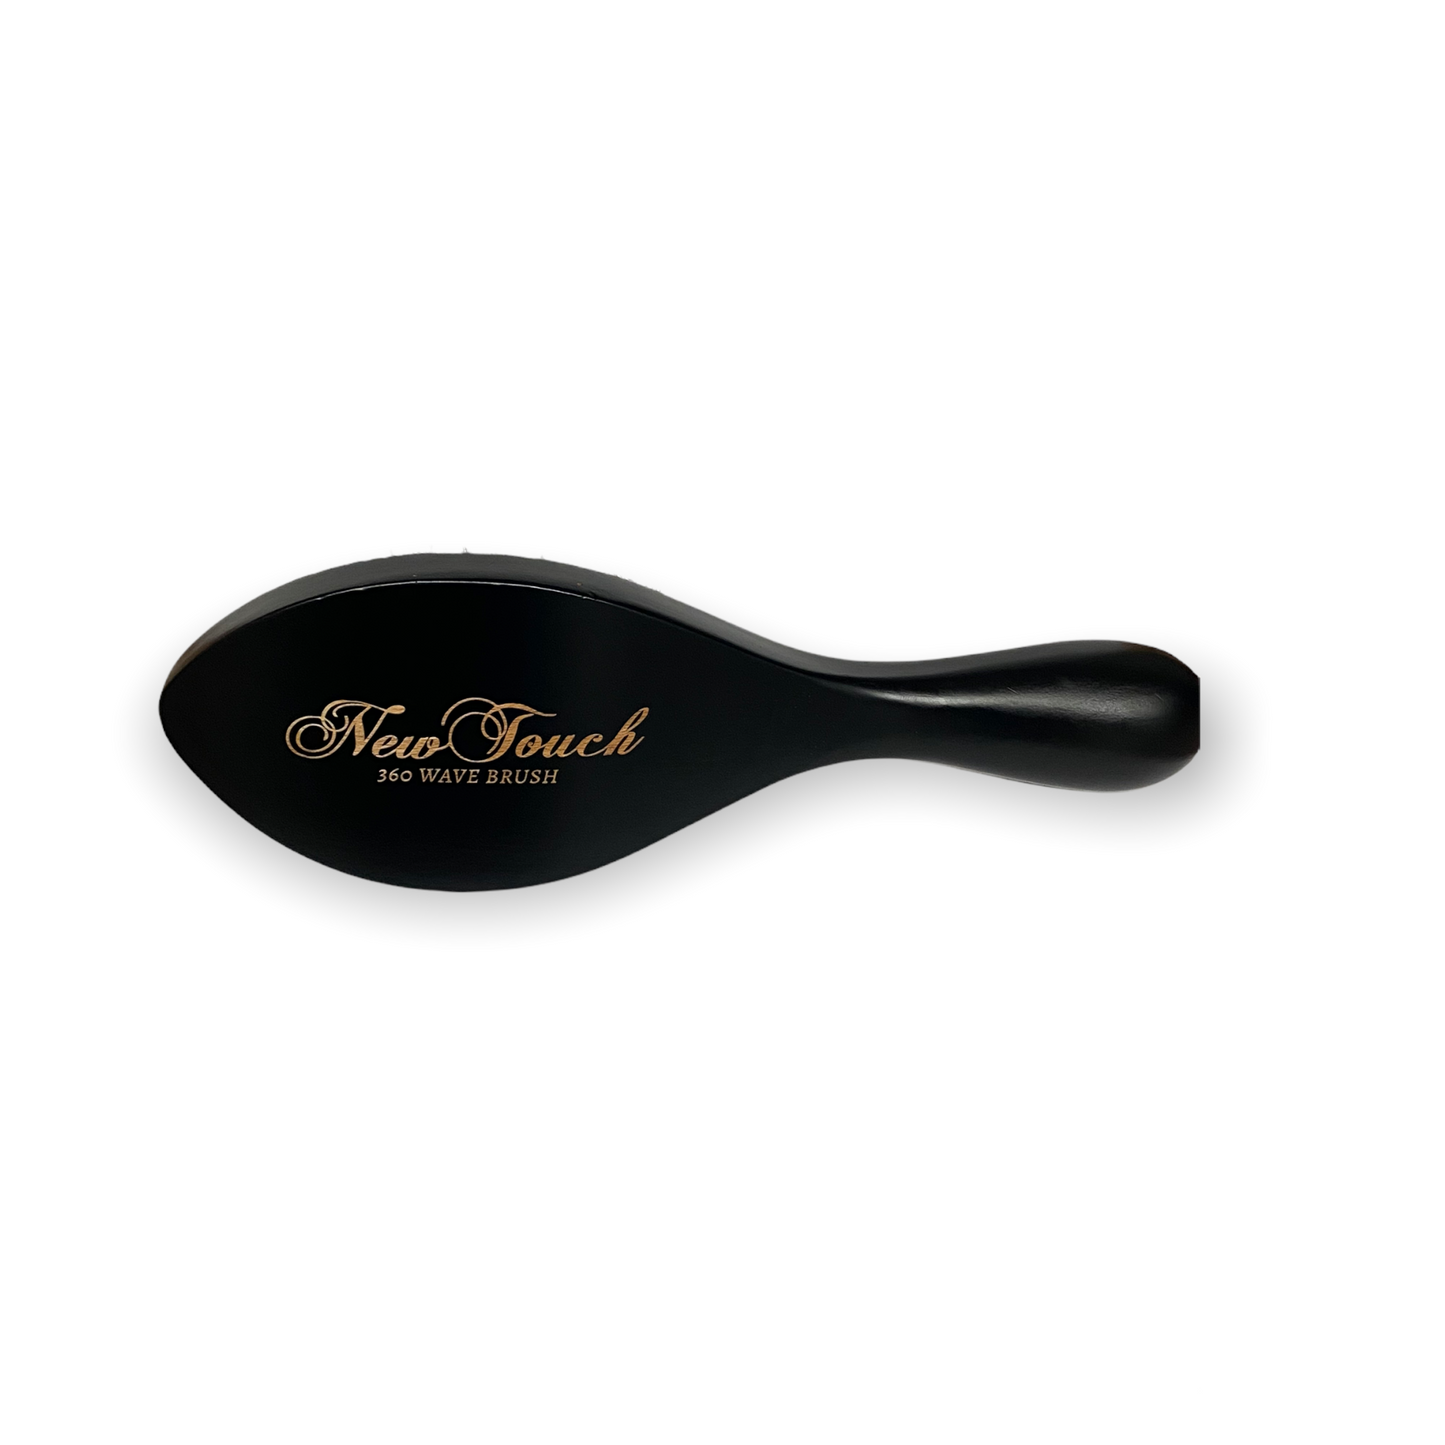 NEW TOUCH 360 Curve Wave Brush